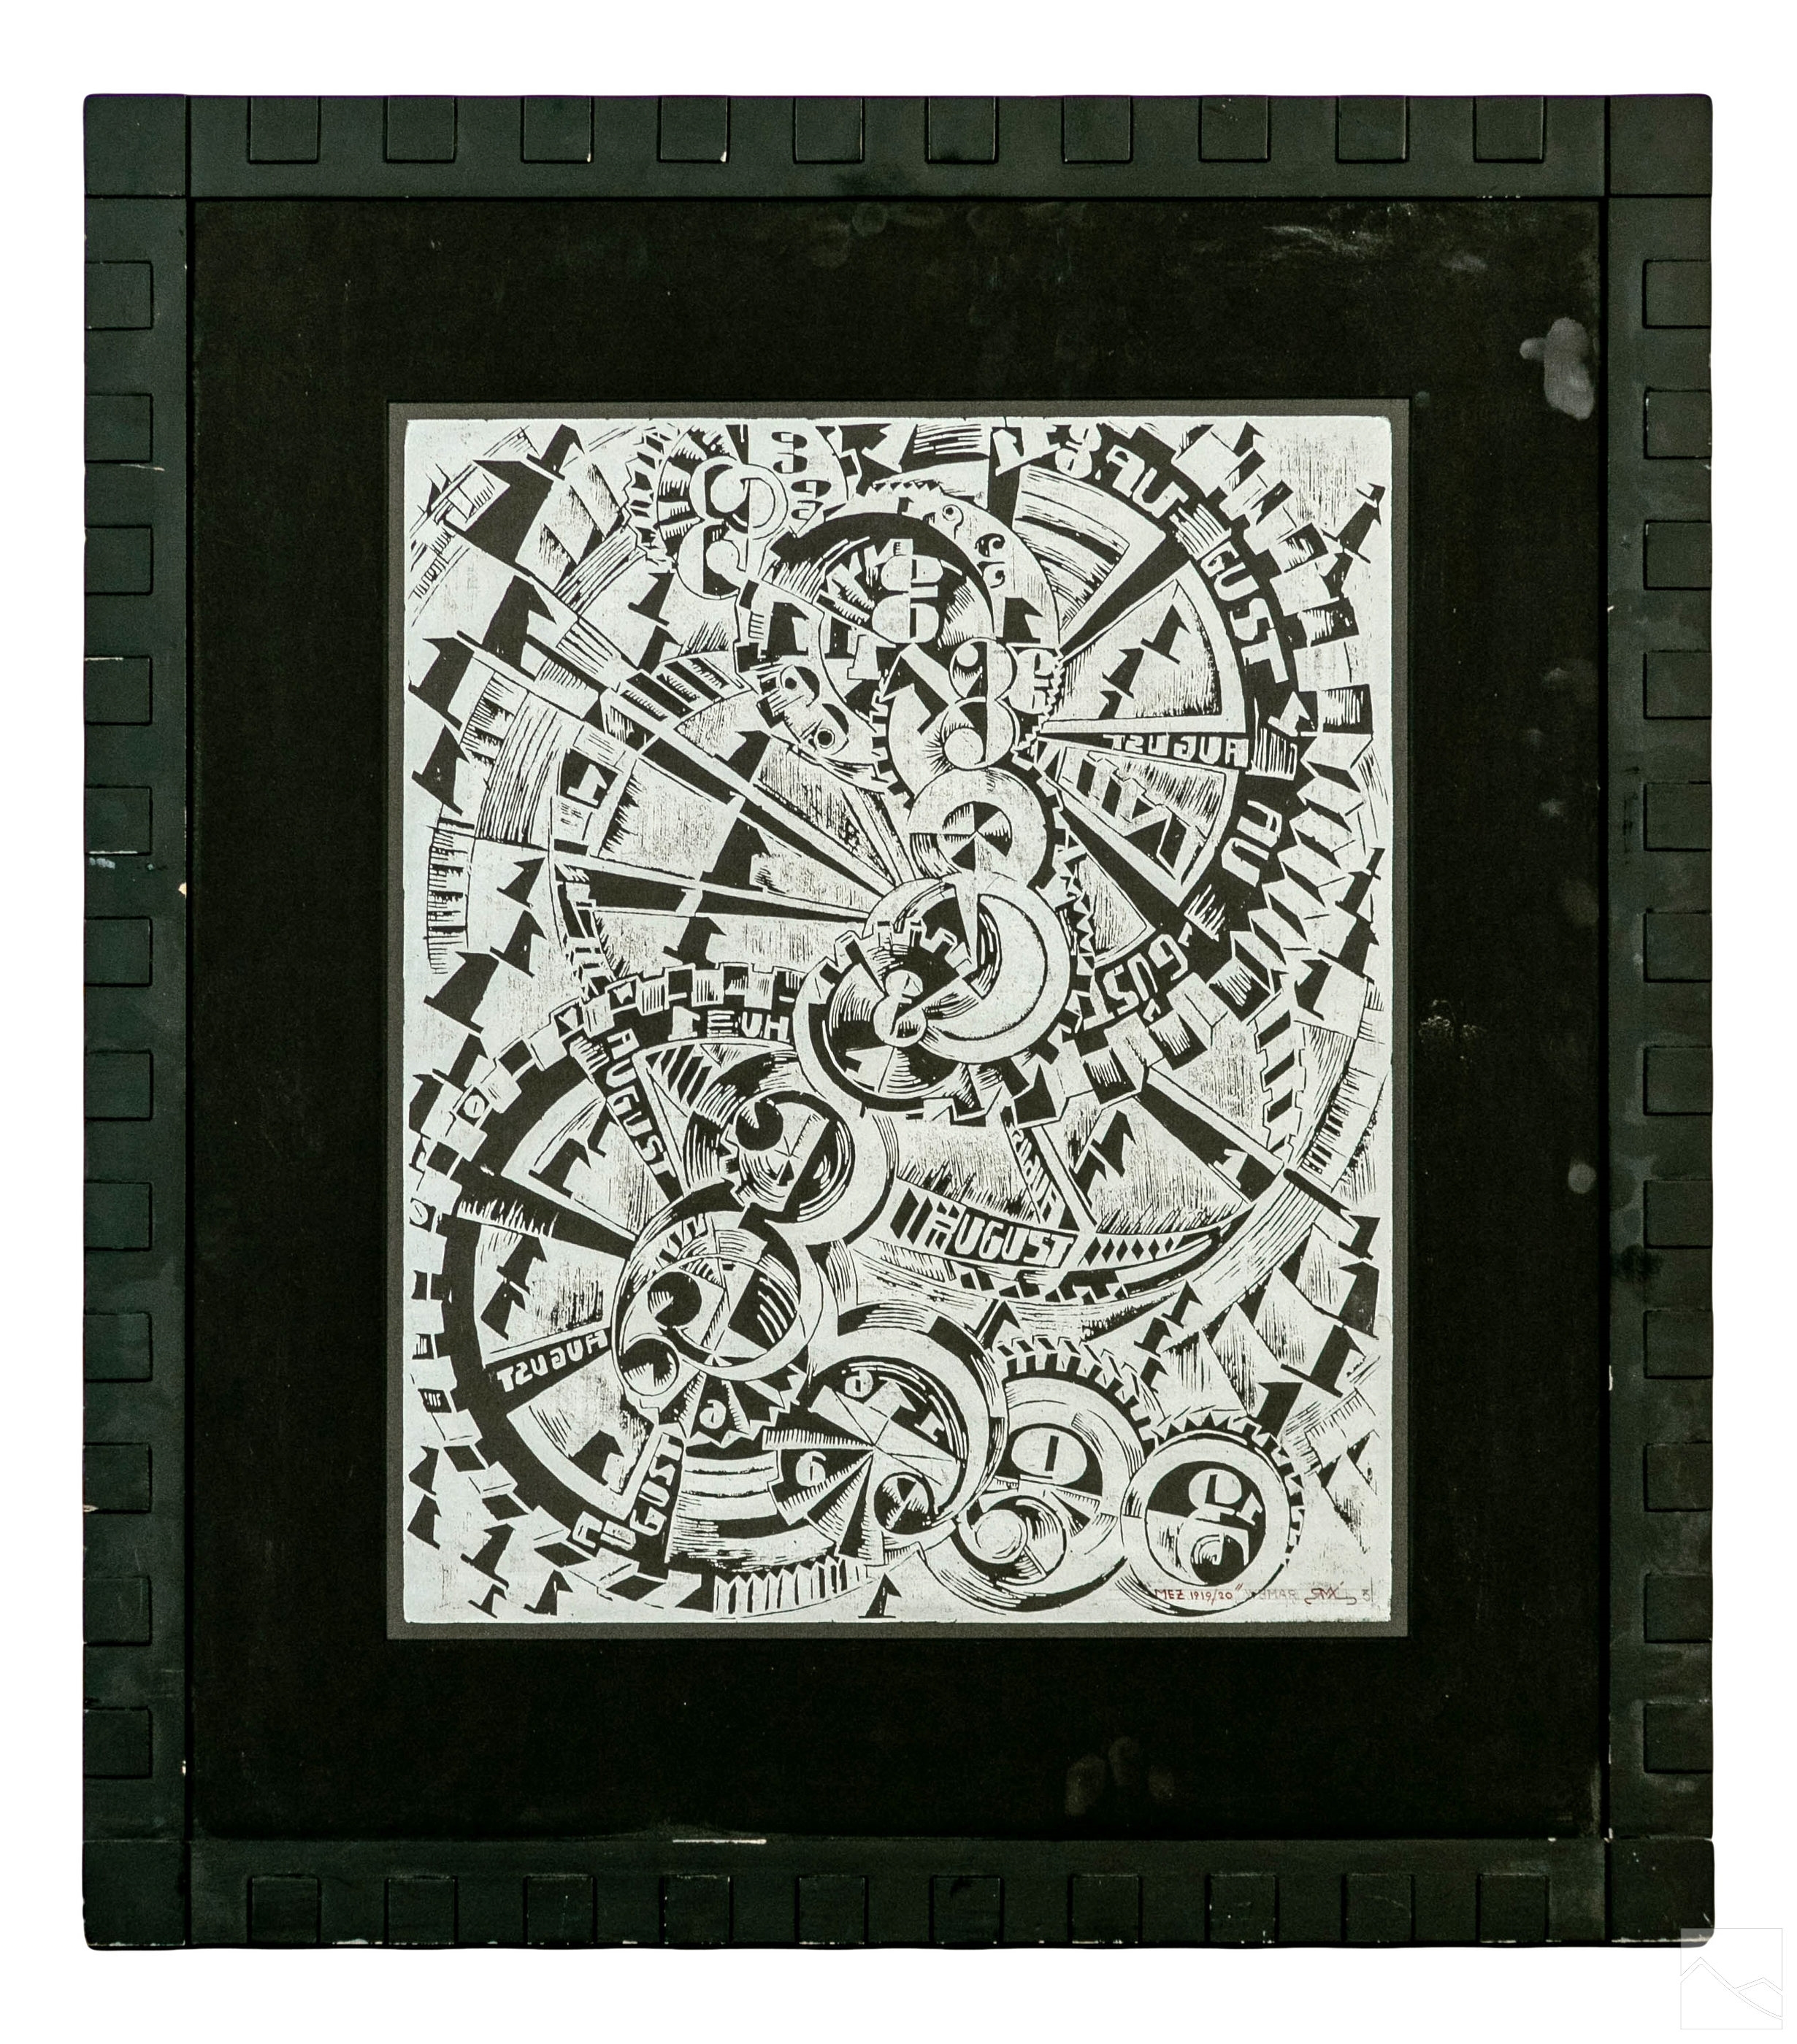 Artwork by Robert Michel, Central European Time #3, Made of woodcut print, Silver ink on black paper